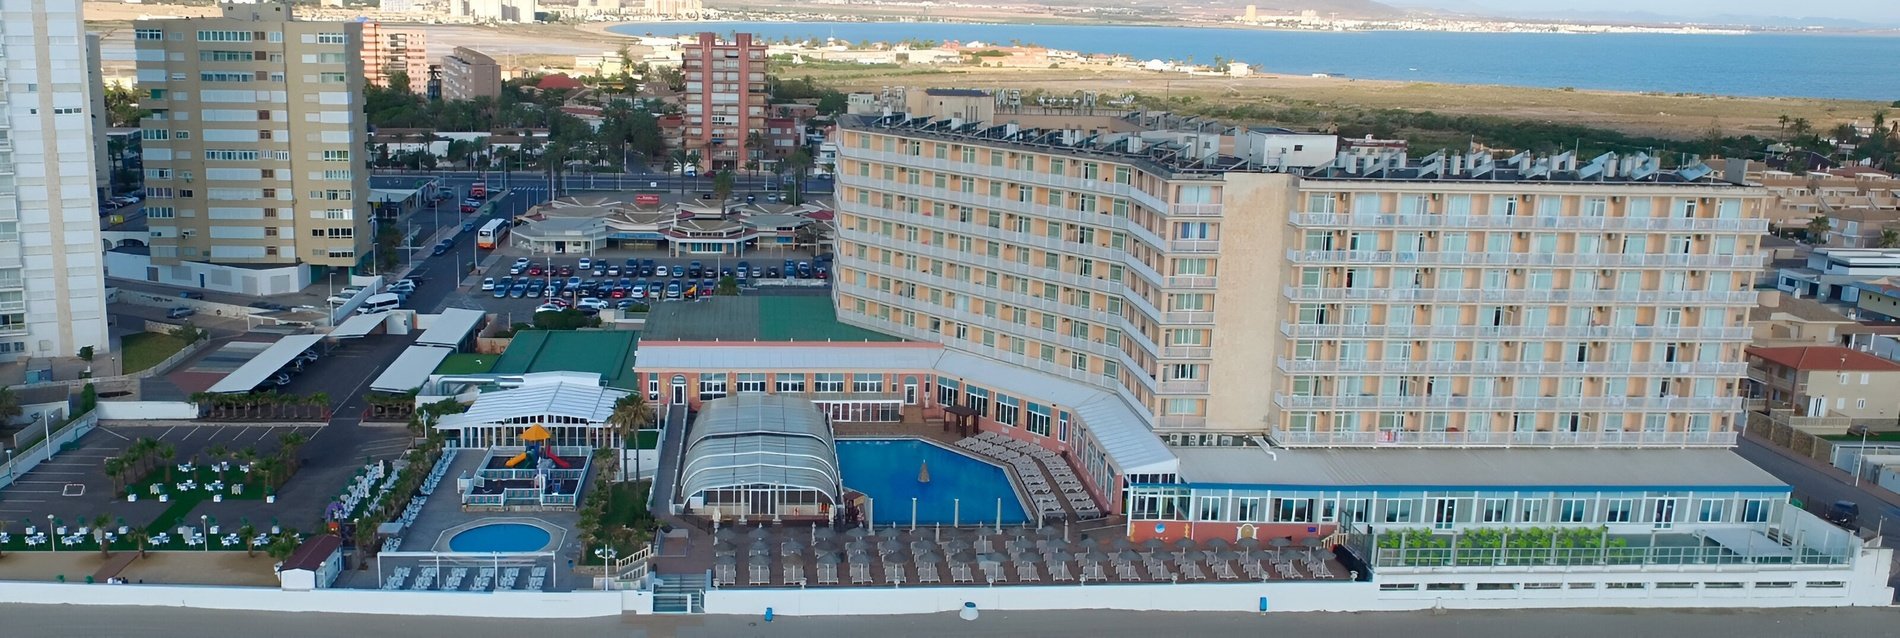 an aerial view of a beach resort with a swimming pool